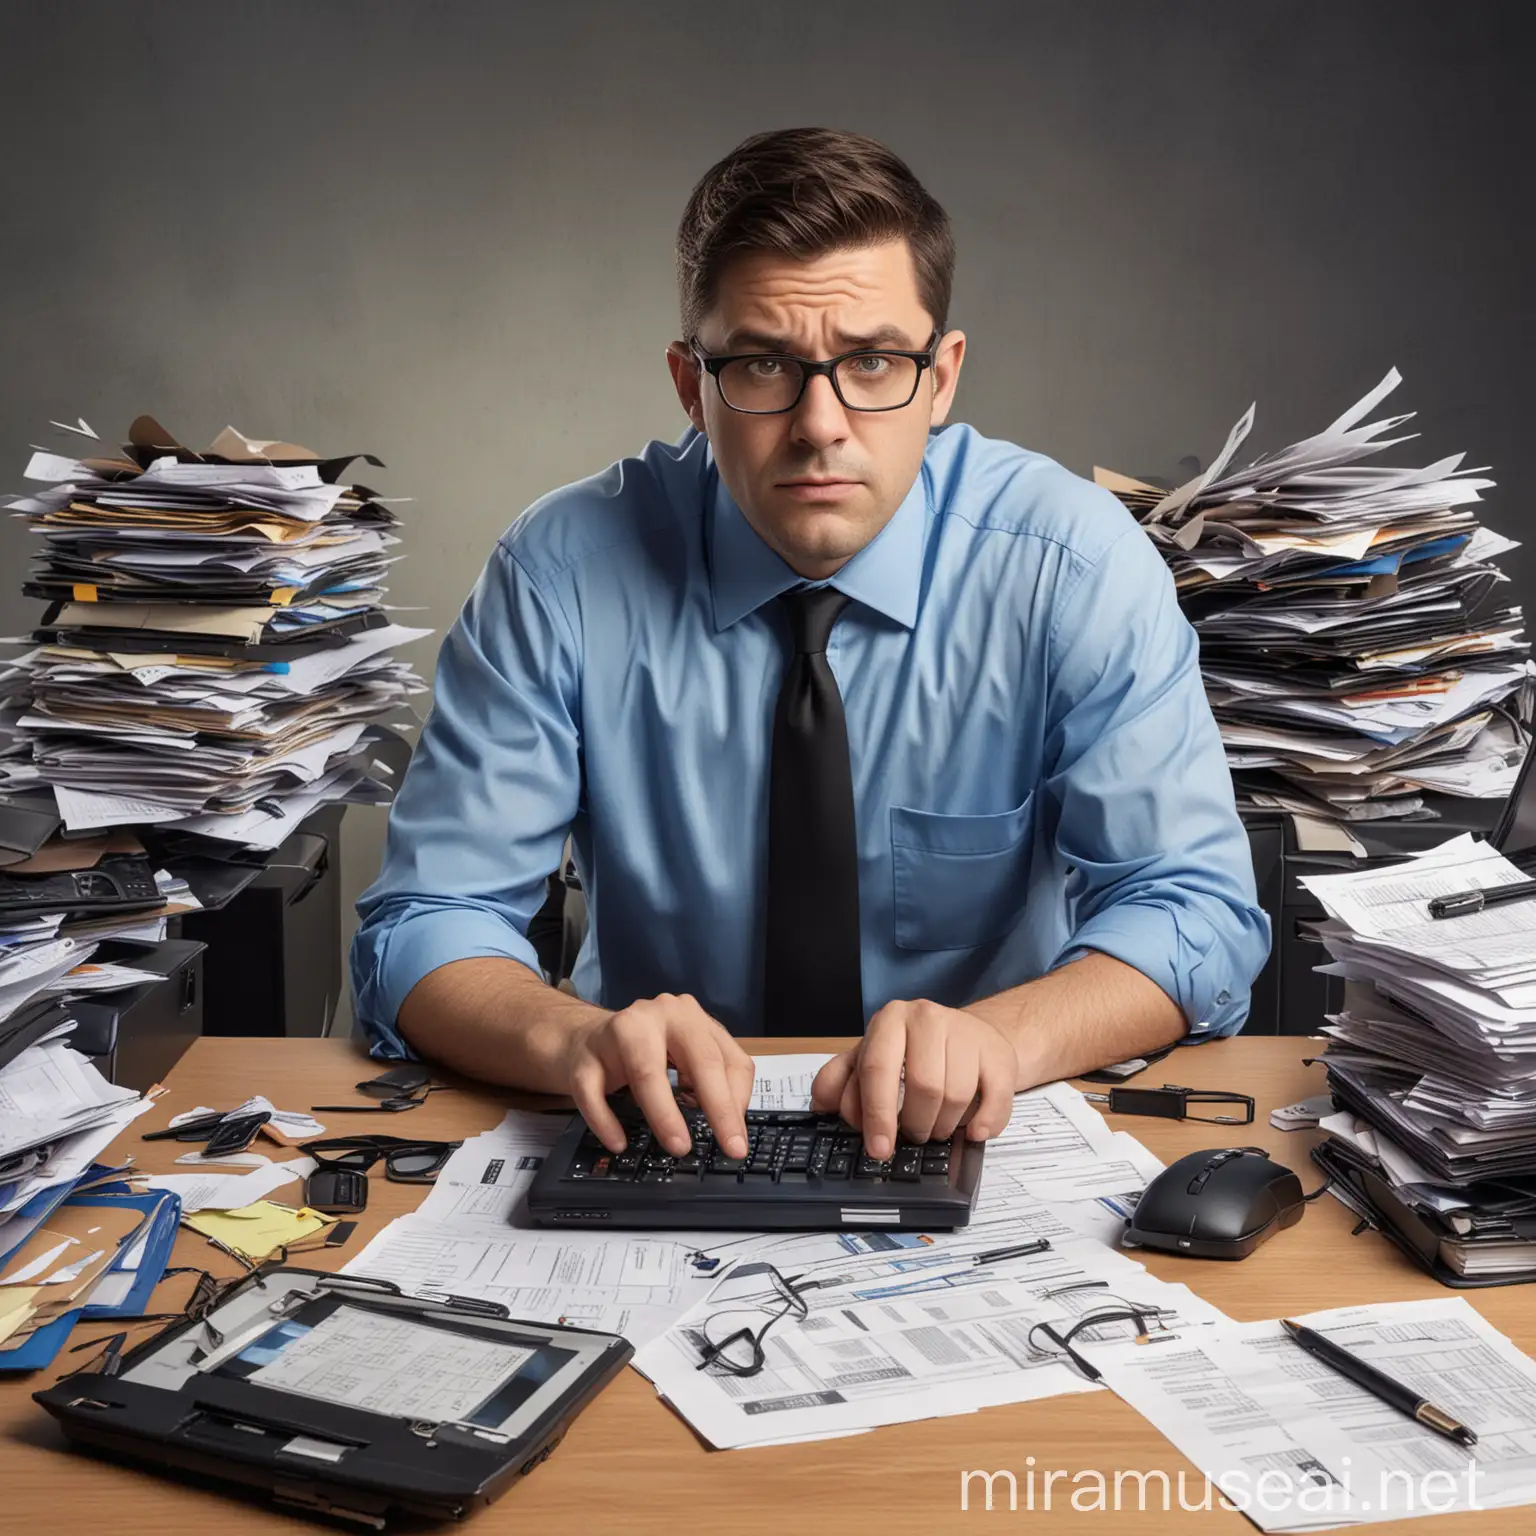 After Image: photo realistic photo of an unhappy, male accountant, blue shirt, black tie, glasses and  behind a cluttered desk with a laptop.